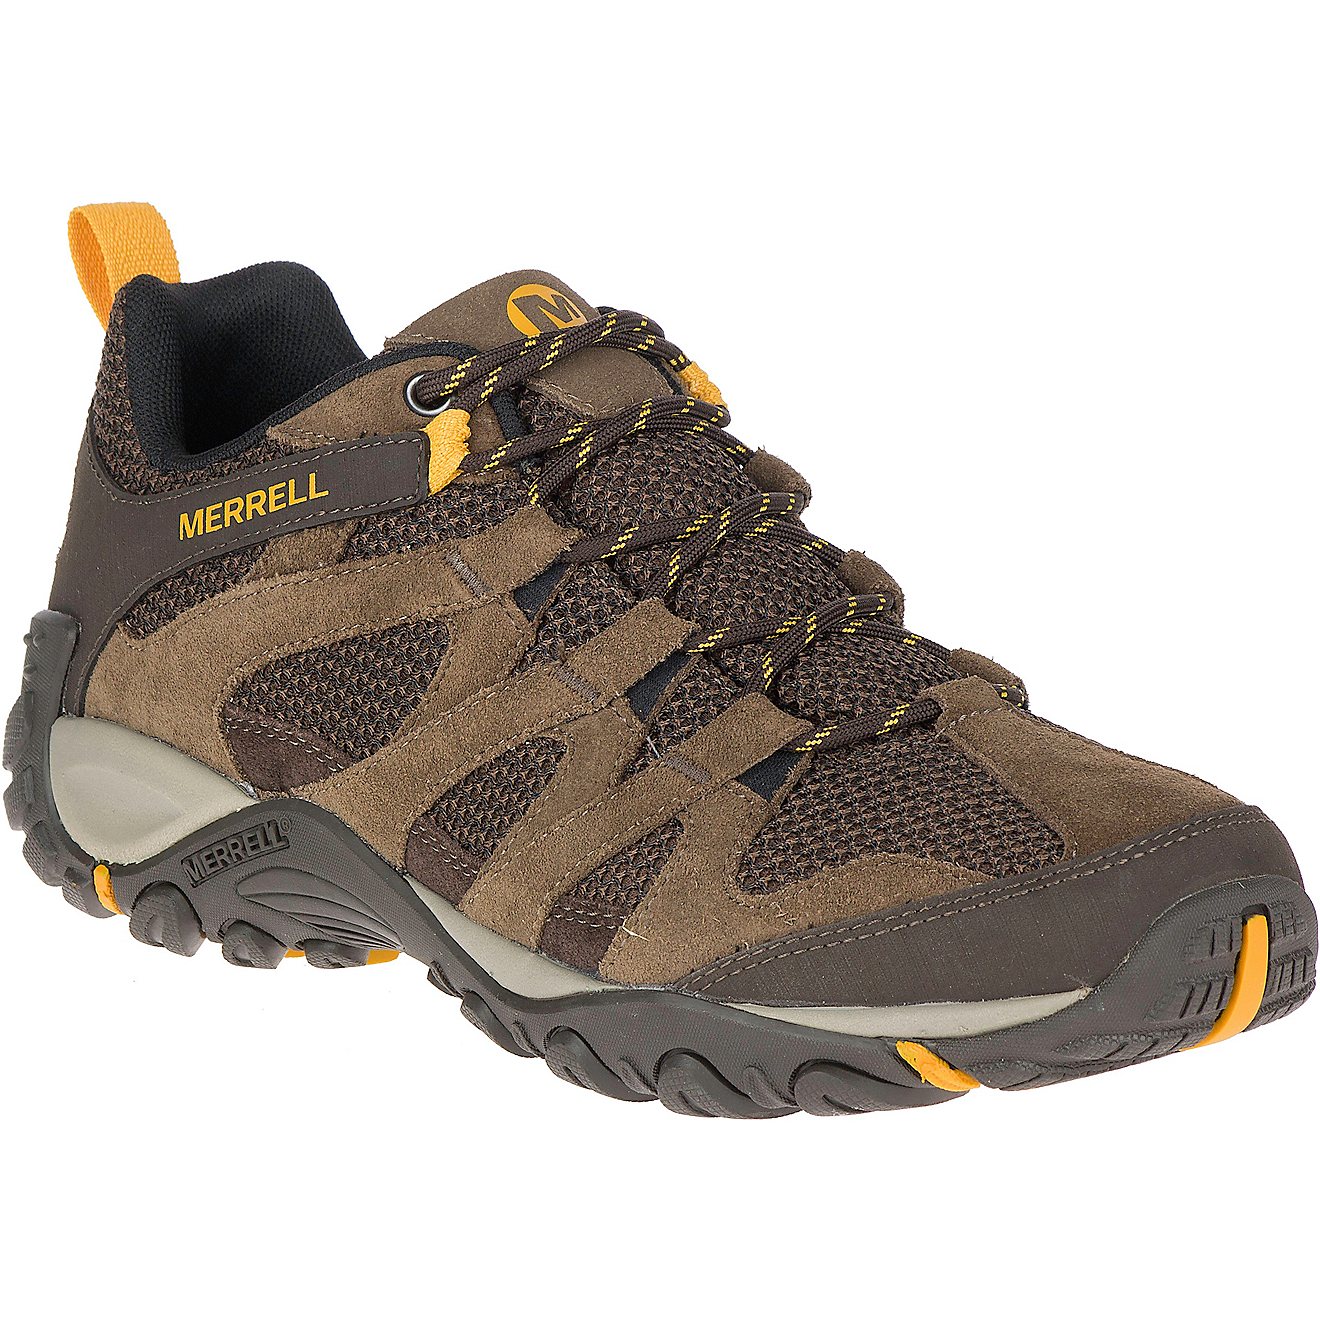 Merrell Men's Alverstone Hiking Shoes | Free Shipping at Academy